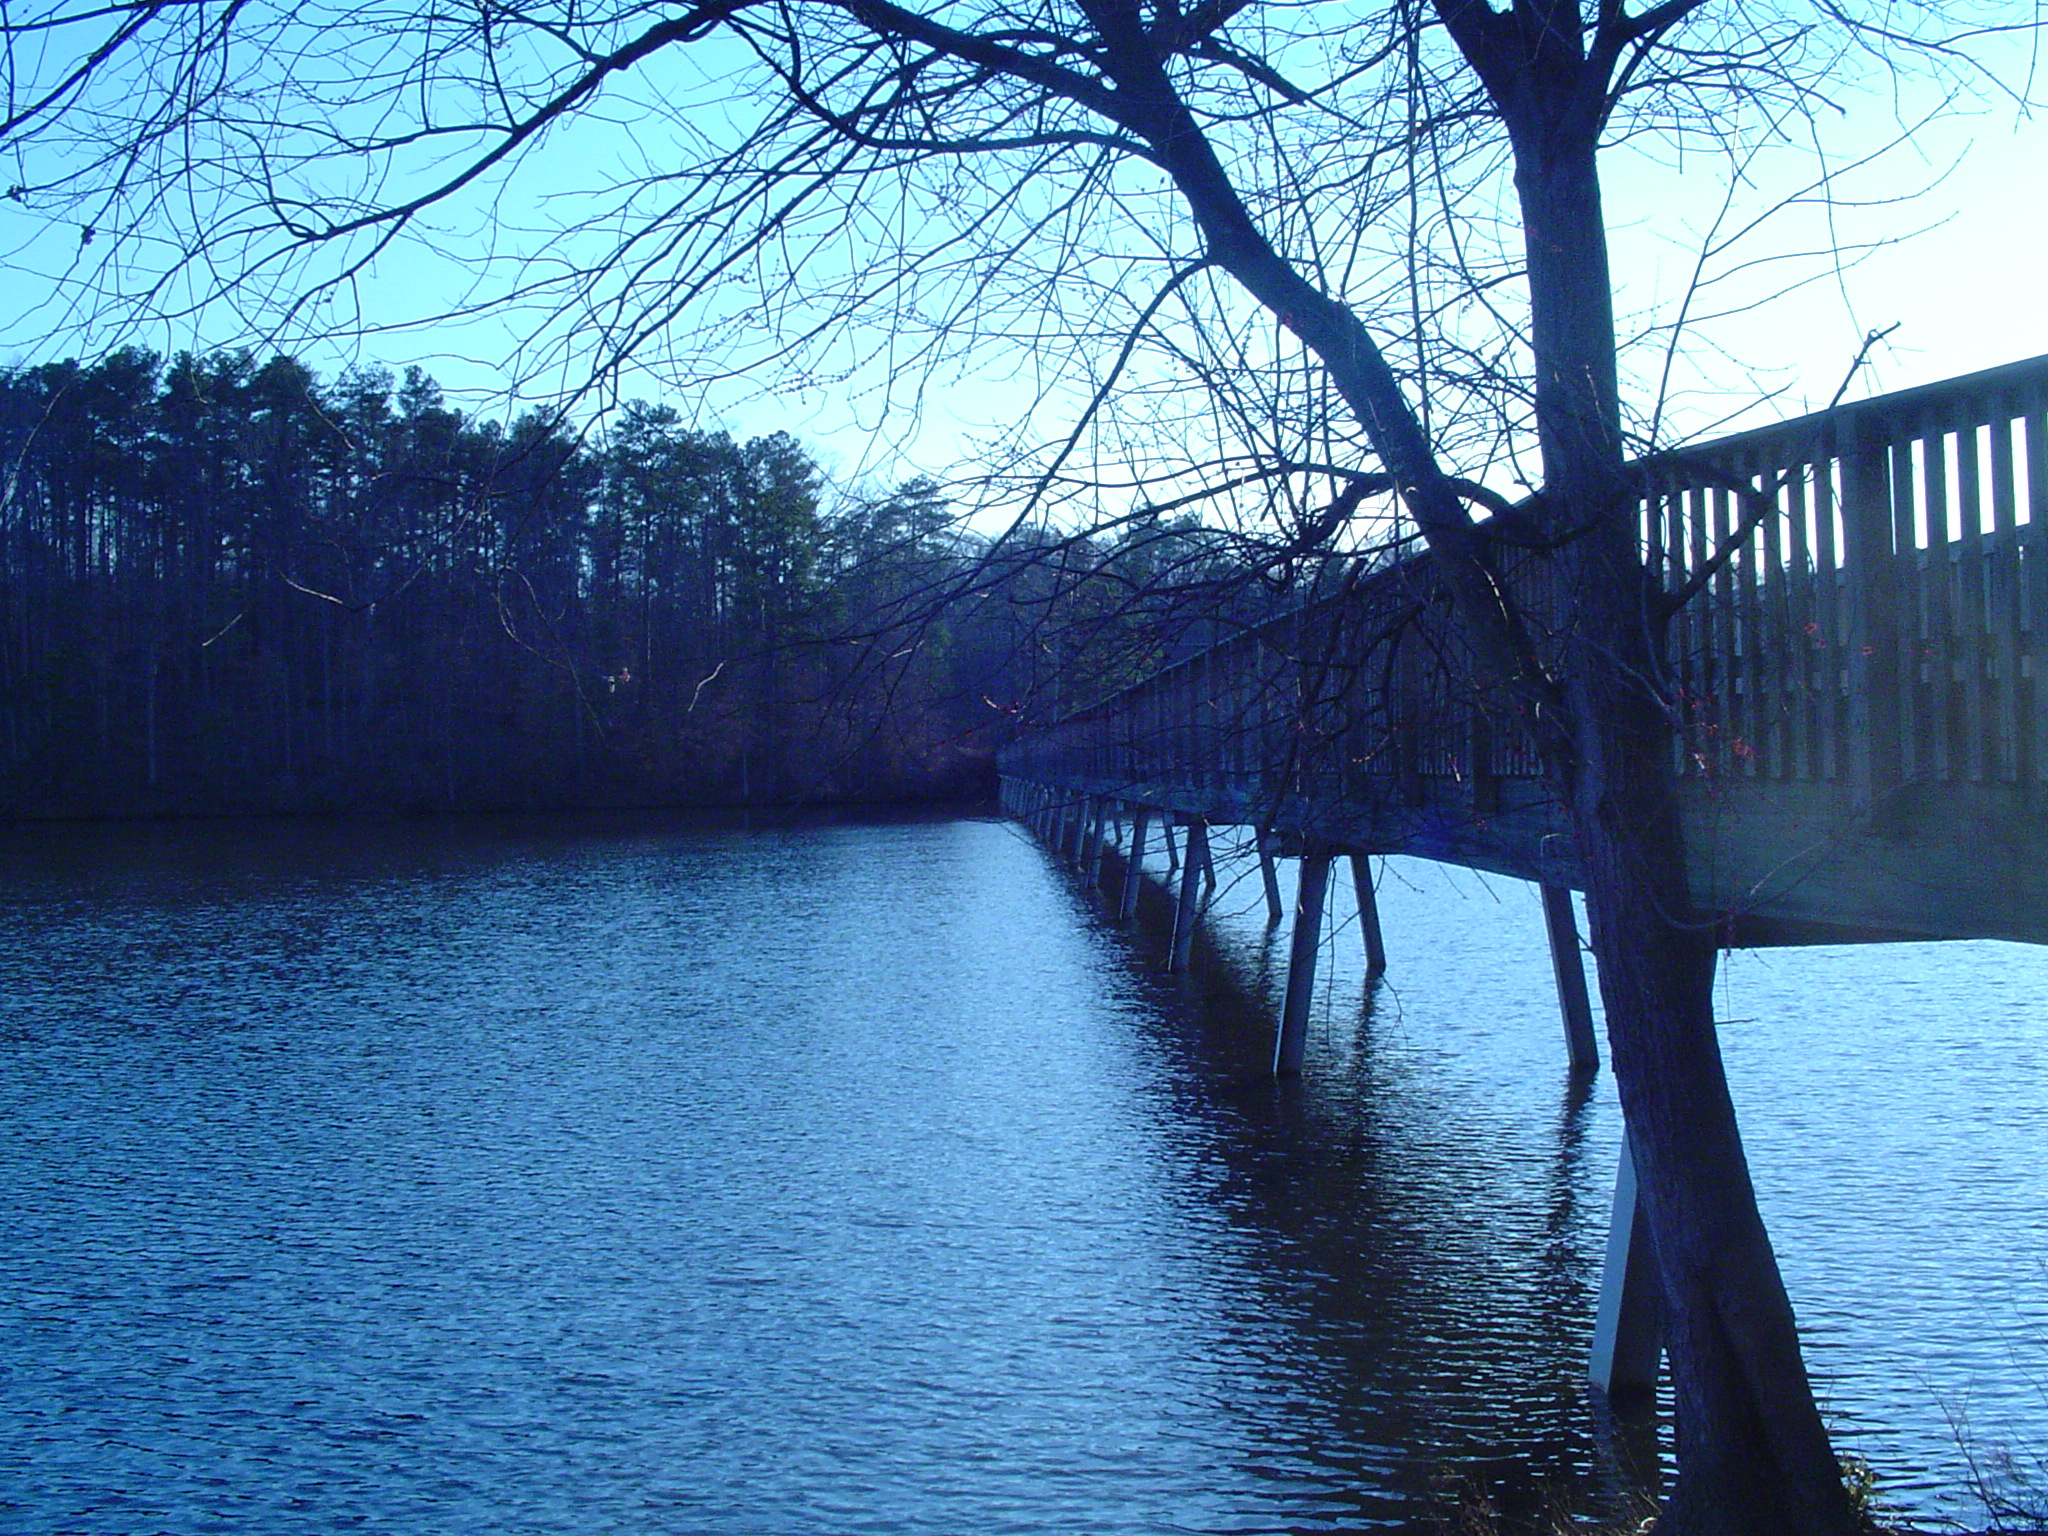 an image of a bridge on the water